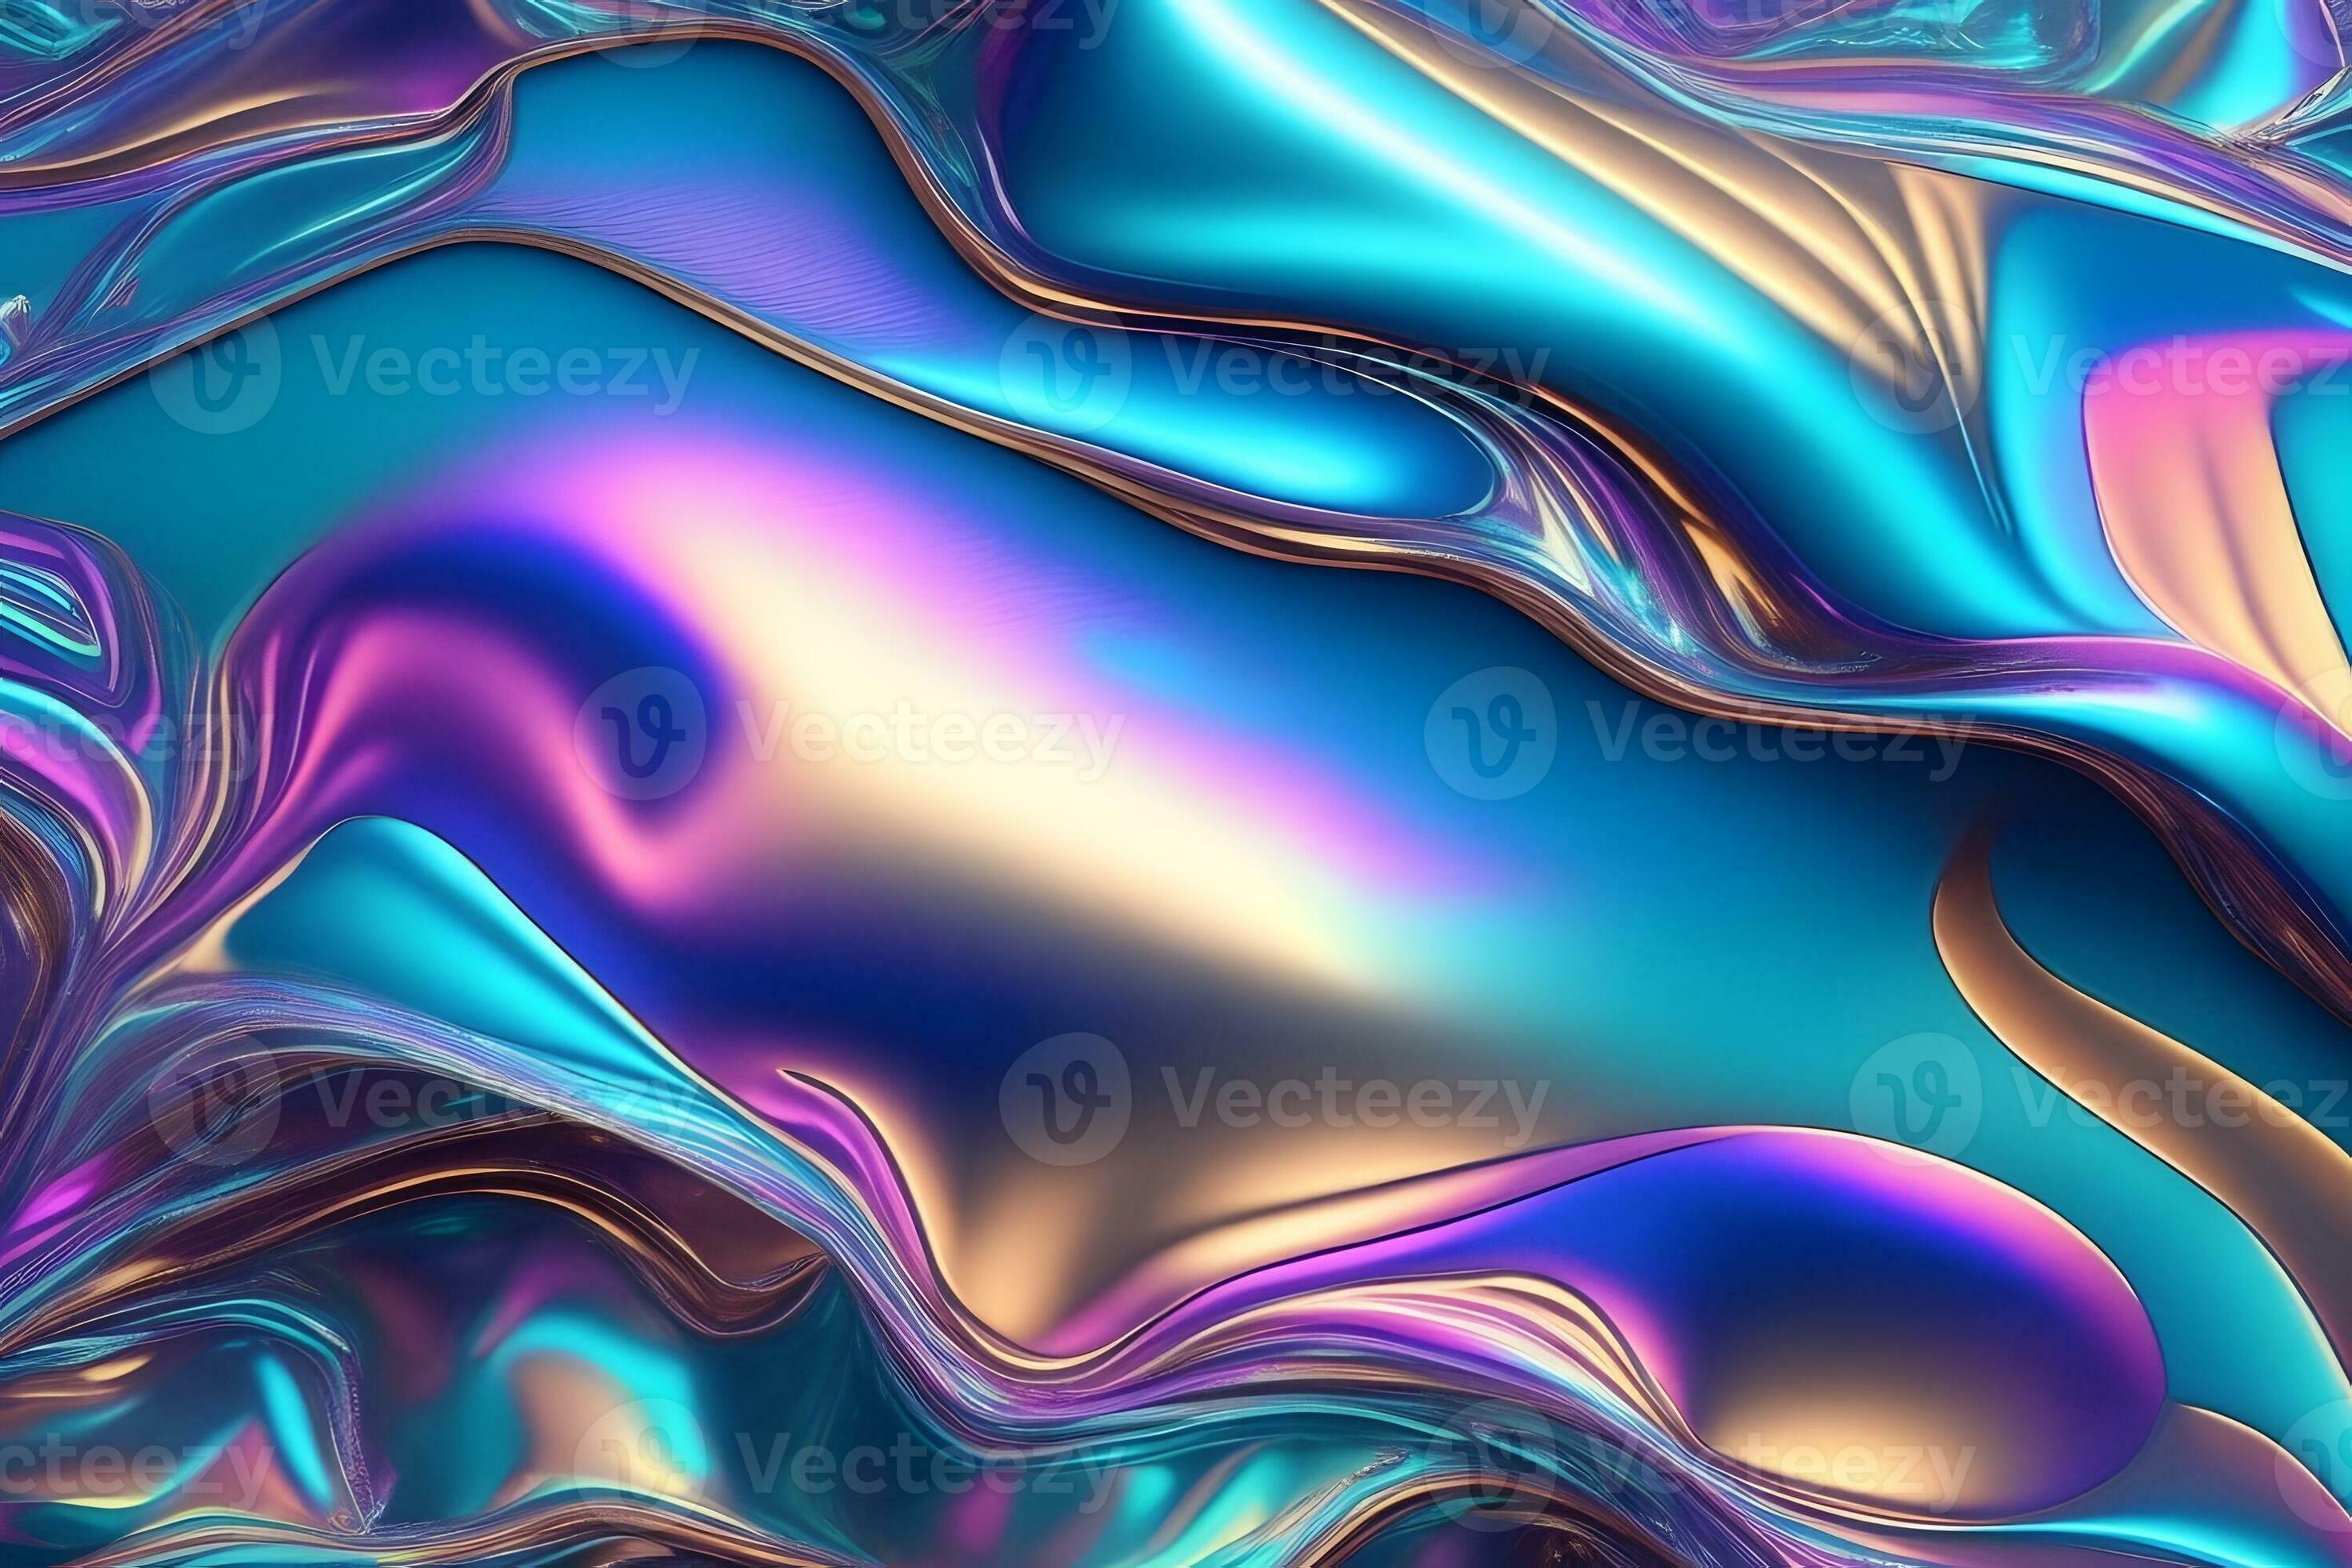 Holographic Glossy Foil Paper, Holographic Iridescent Foil Texture